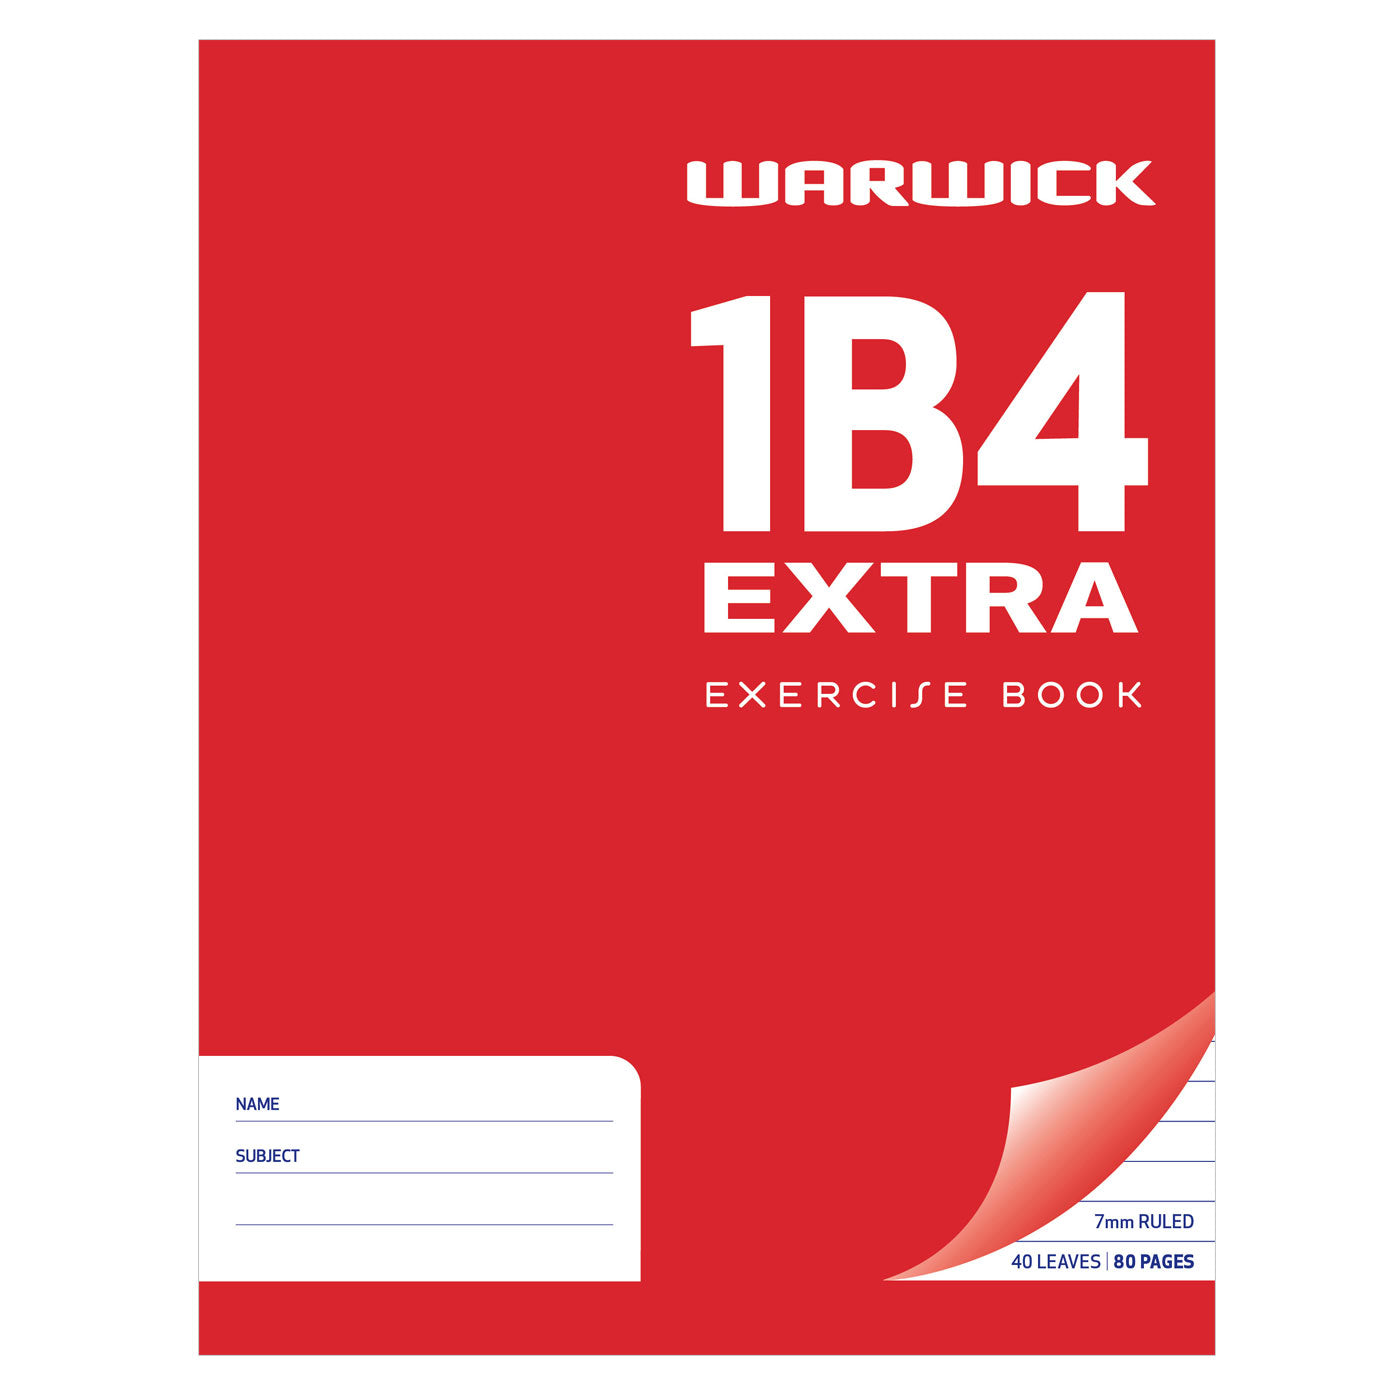 Warwick Exercise Book 1B4 Extra 40 Leaf Ruled 7 mm